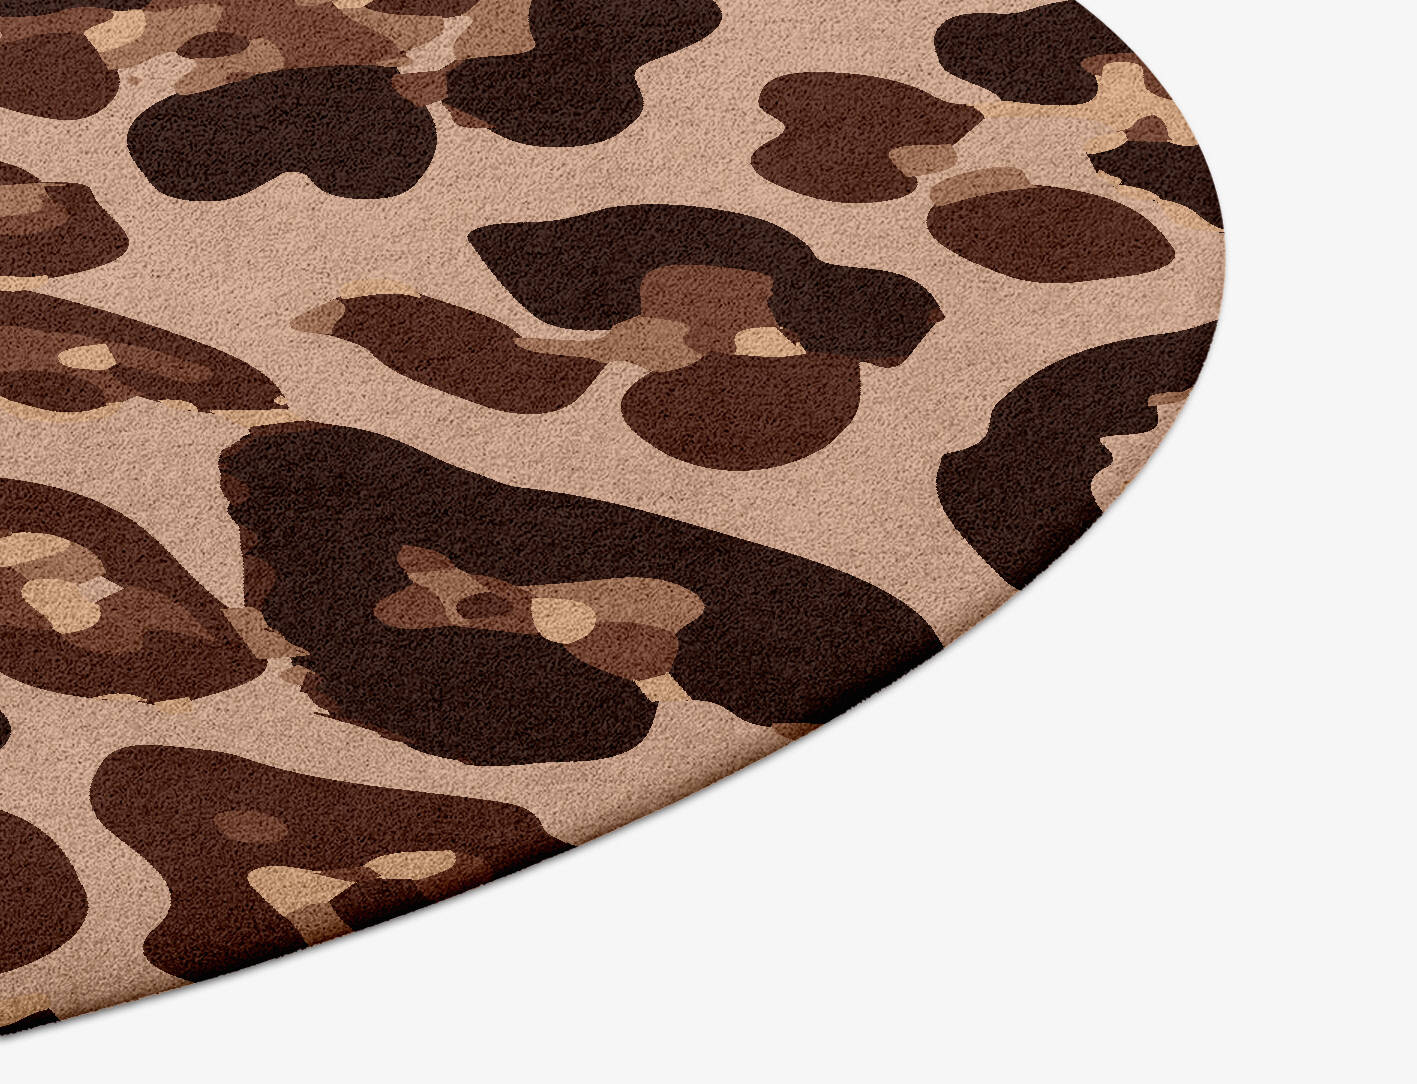 Fawn Spots Animal Prints Round Hand Tufted Pure Wool Custom Rug by Rug Artisan